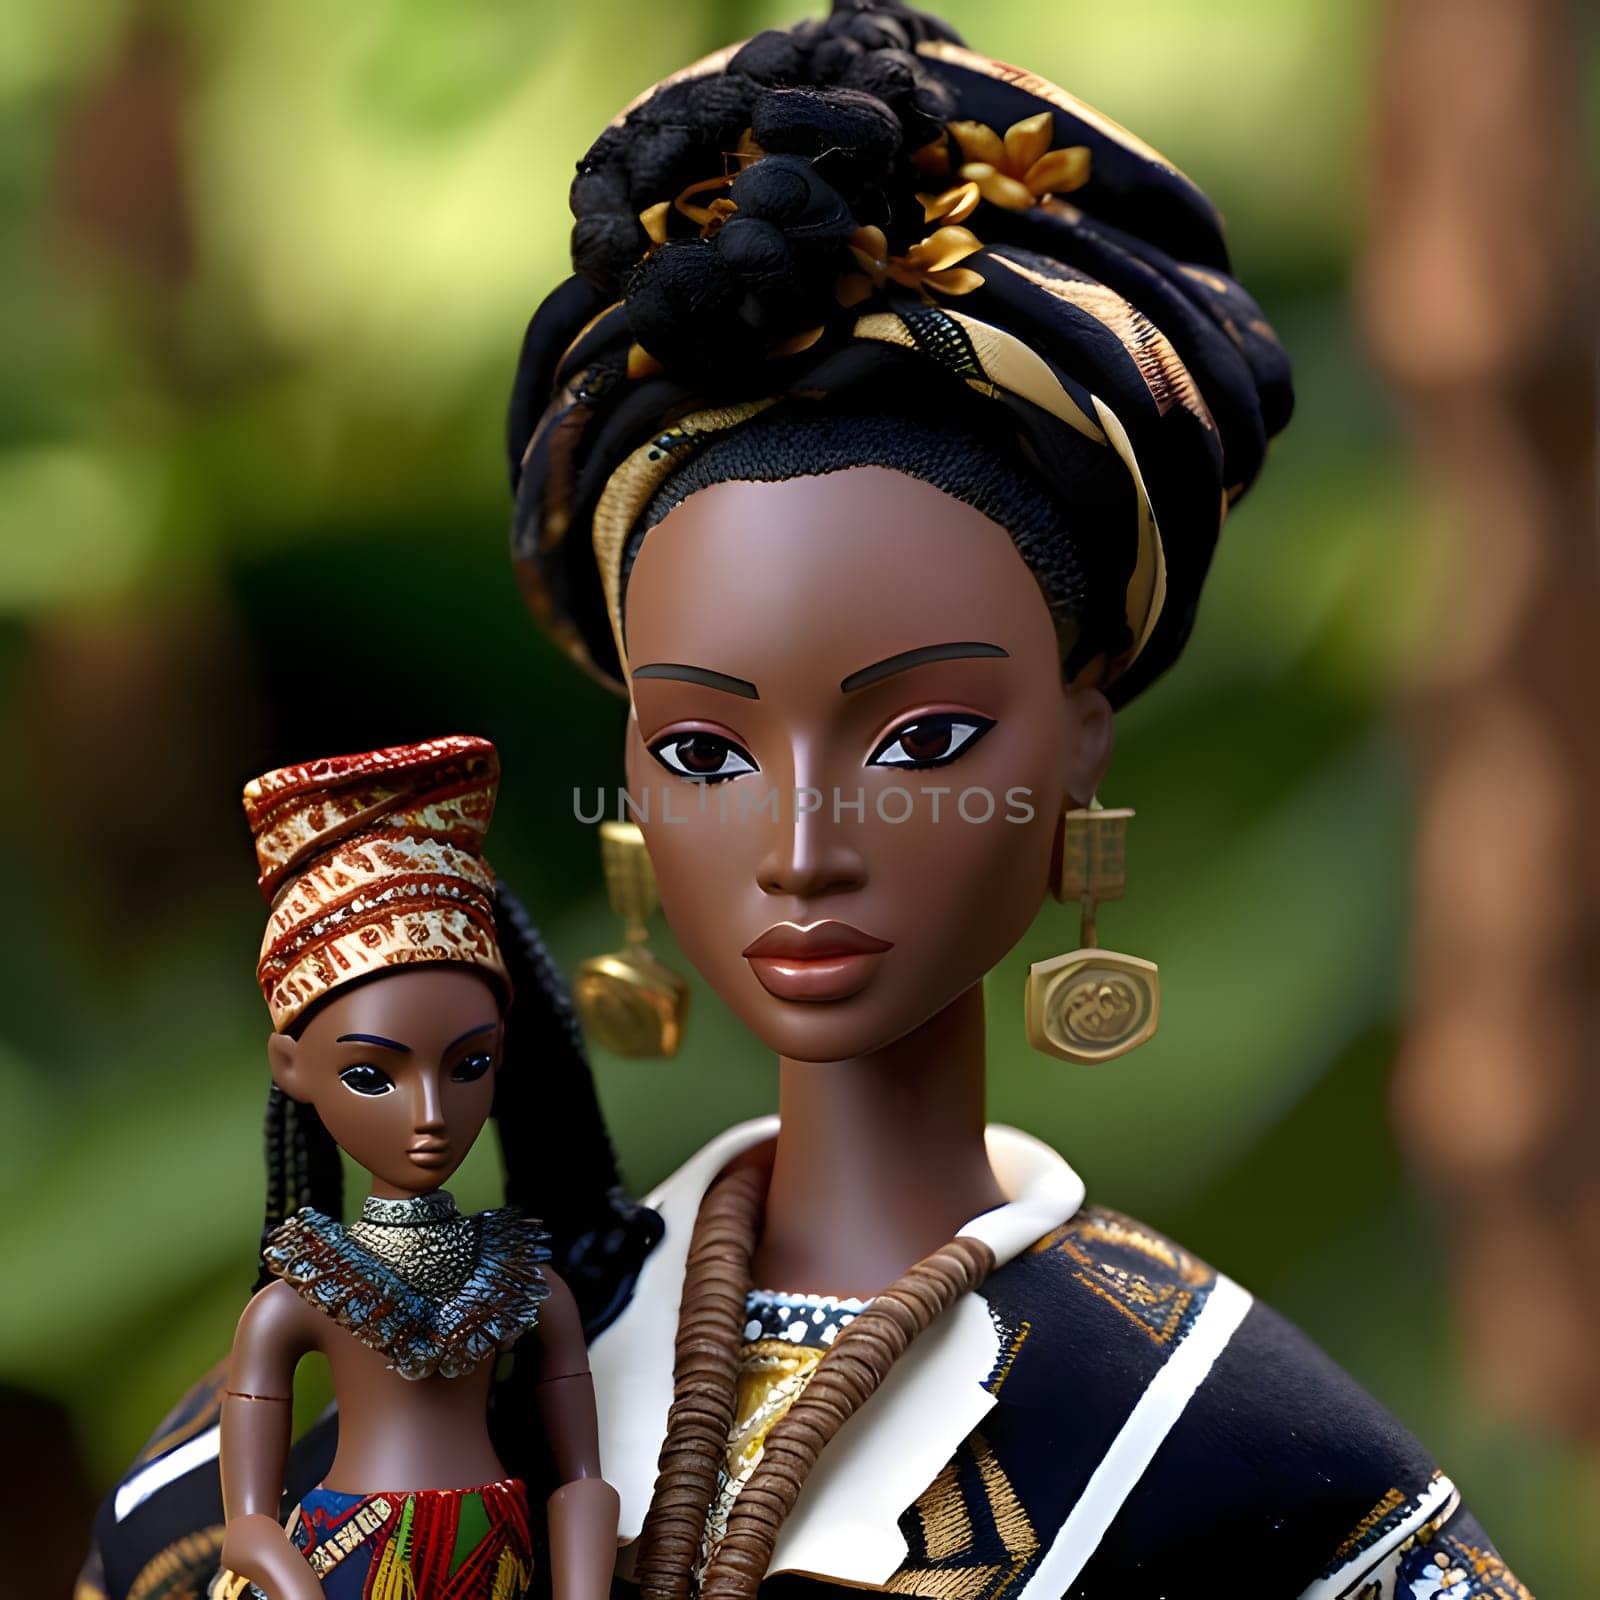 The black Barbie looks stunning in her rich outfit, radiating grace and beauty with every step she takes.